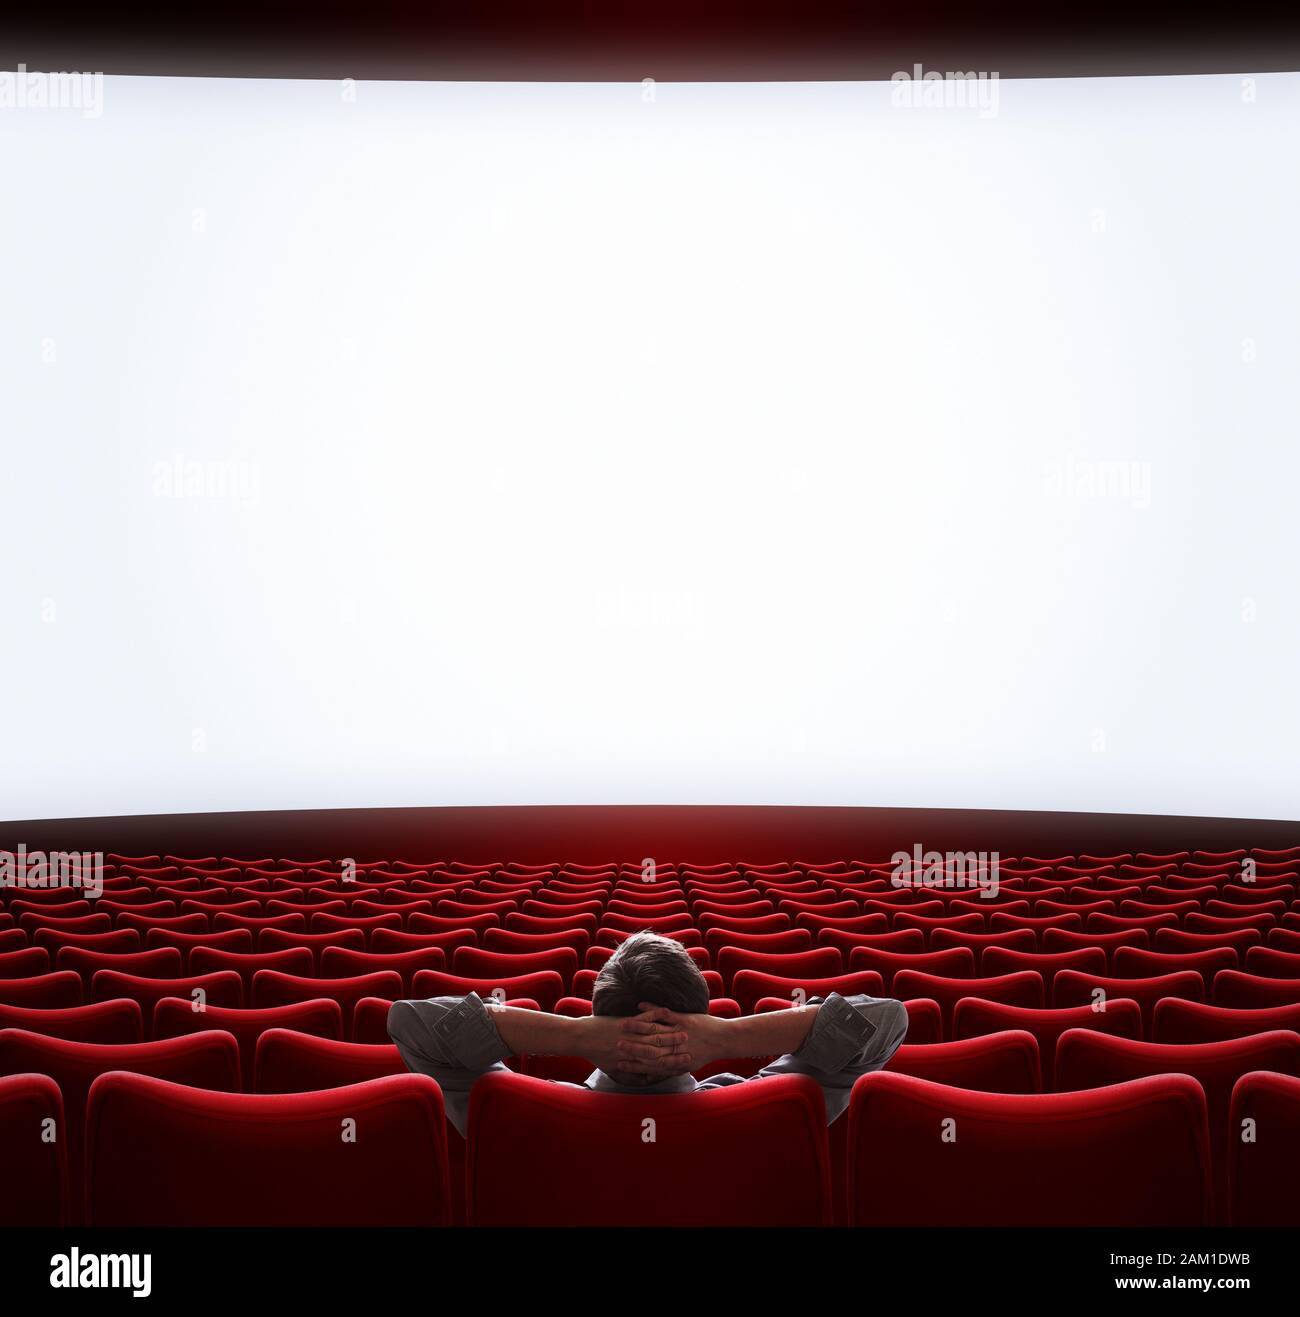 Blank movie screen with lonely man sitting in center Stock Photo